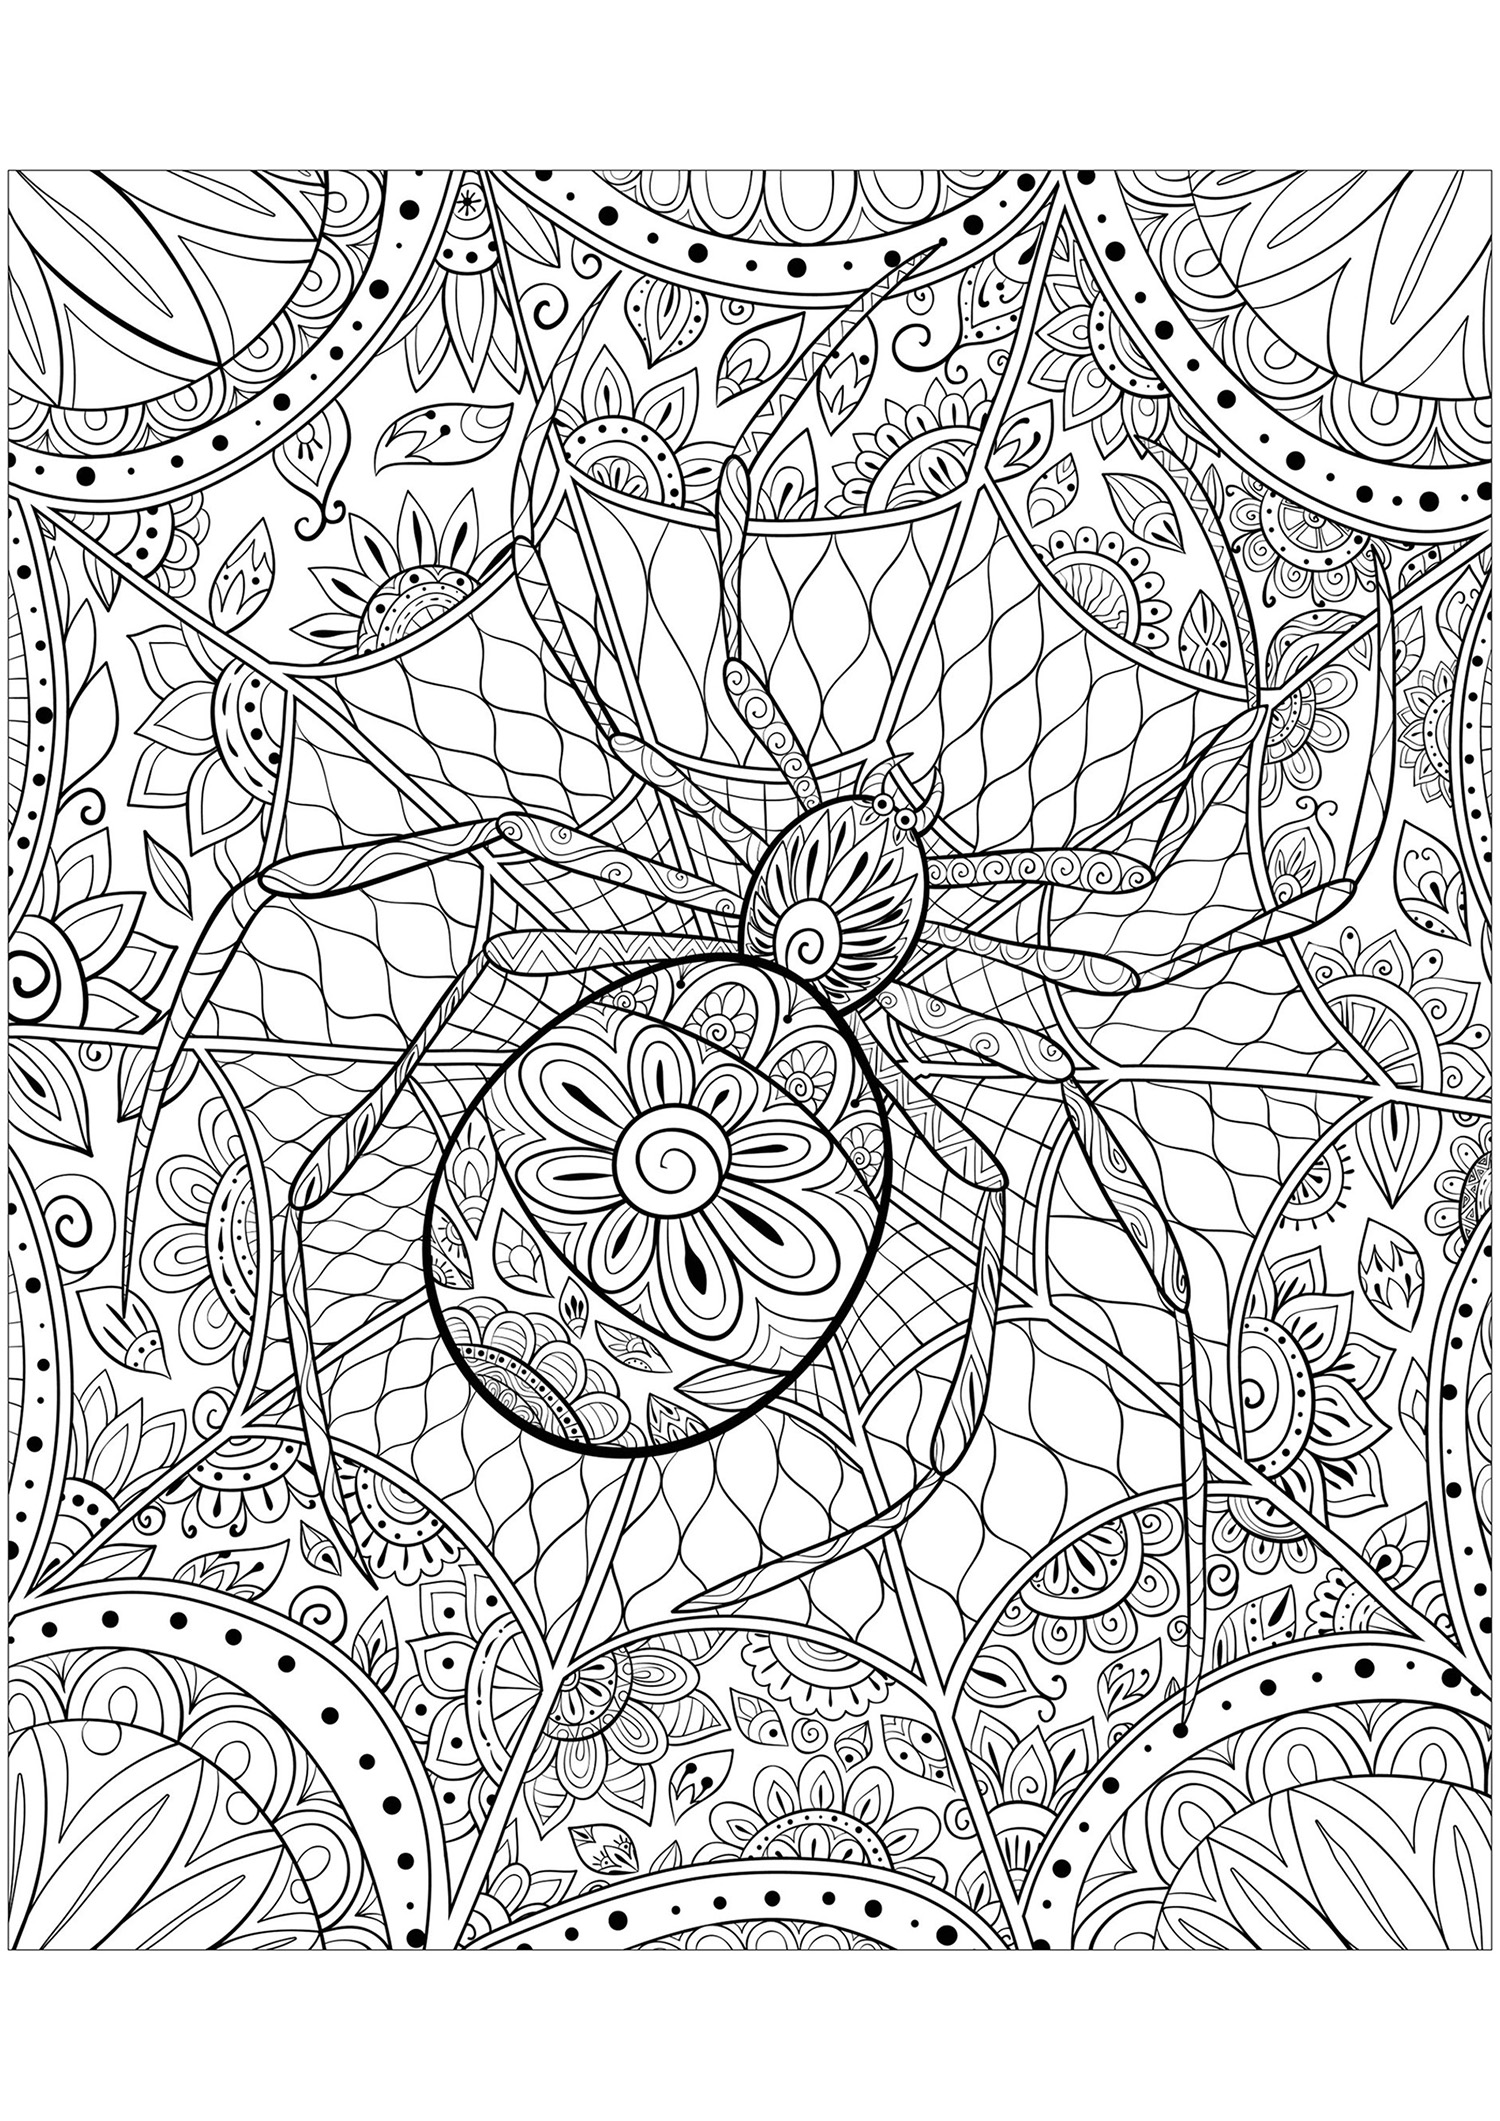 Complex coloring page of a spider - Butterflies & insects Adult ...